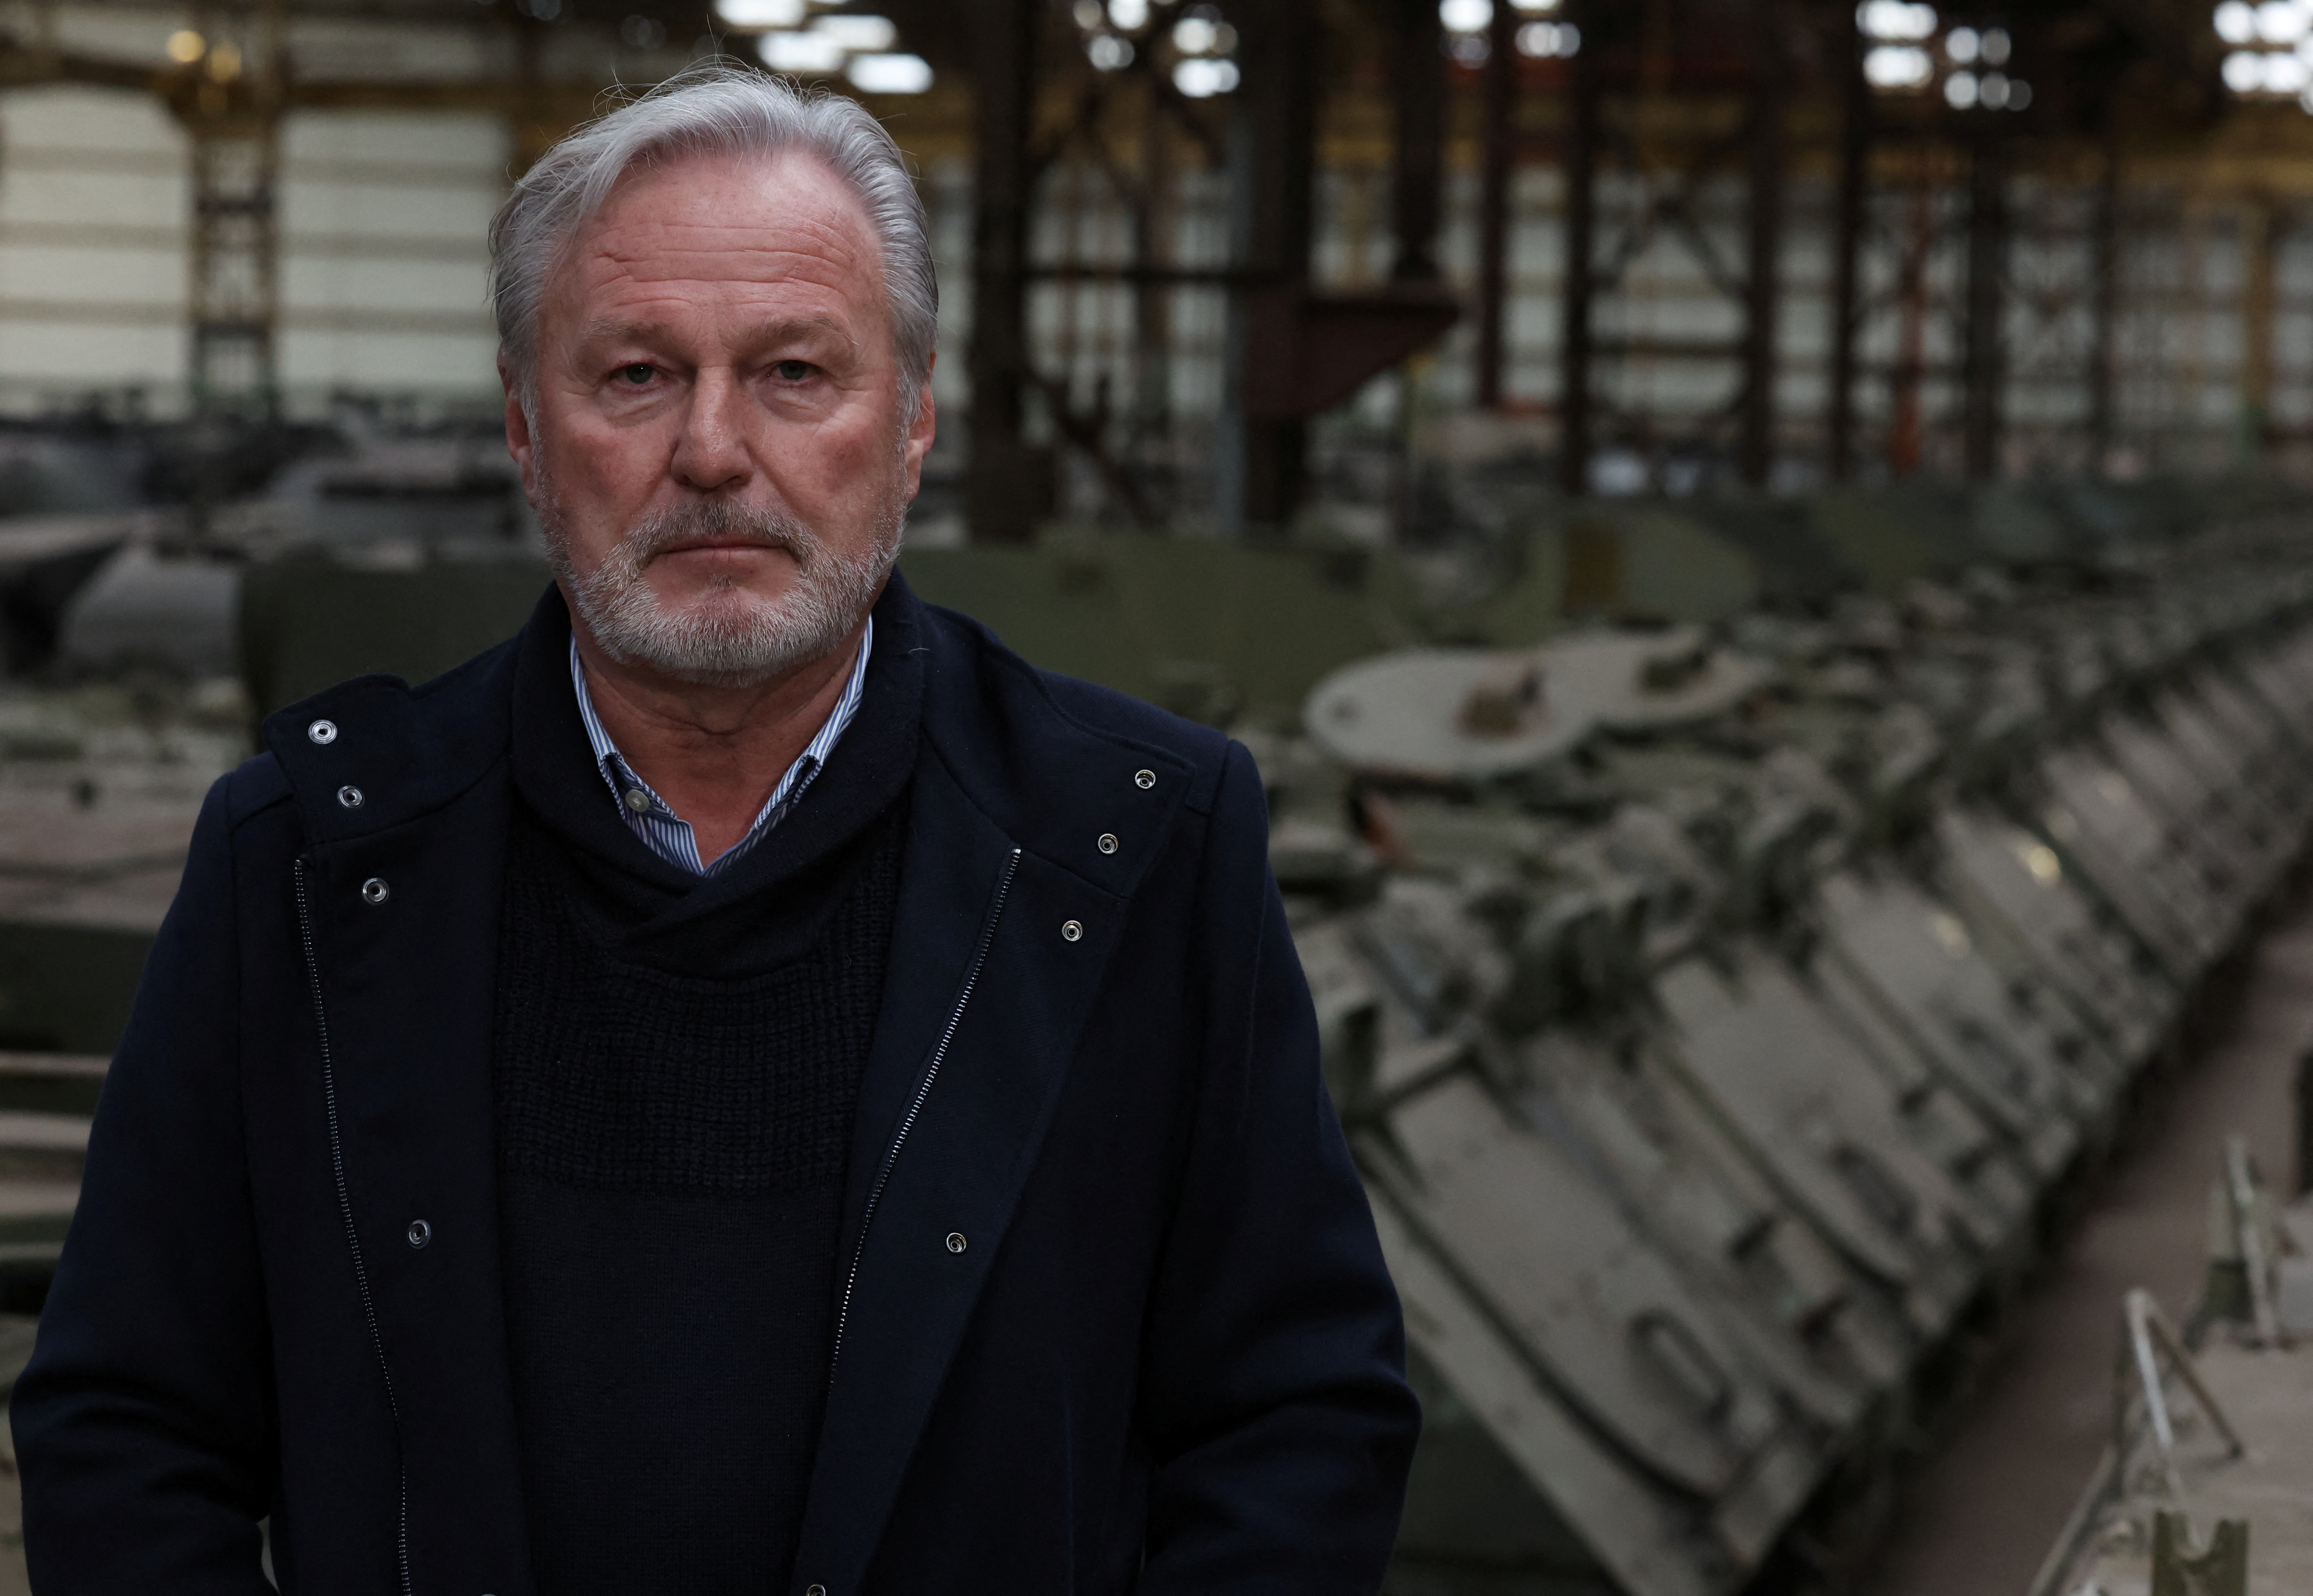 Freddie Verslis, CEO of Belgian defense company OIP Land Systems, looks near armored vehicles in a hangar in Tournai